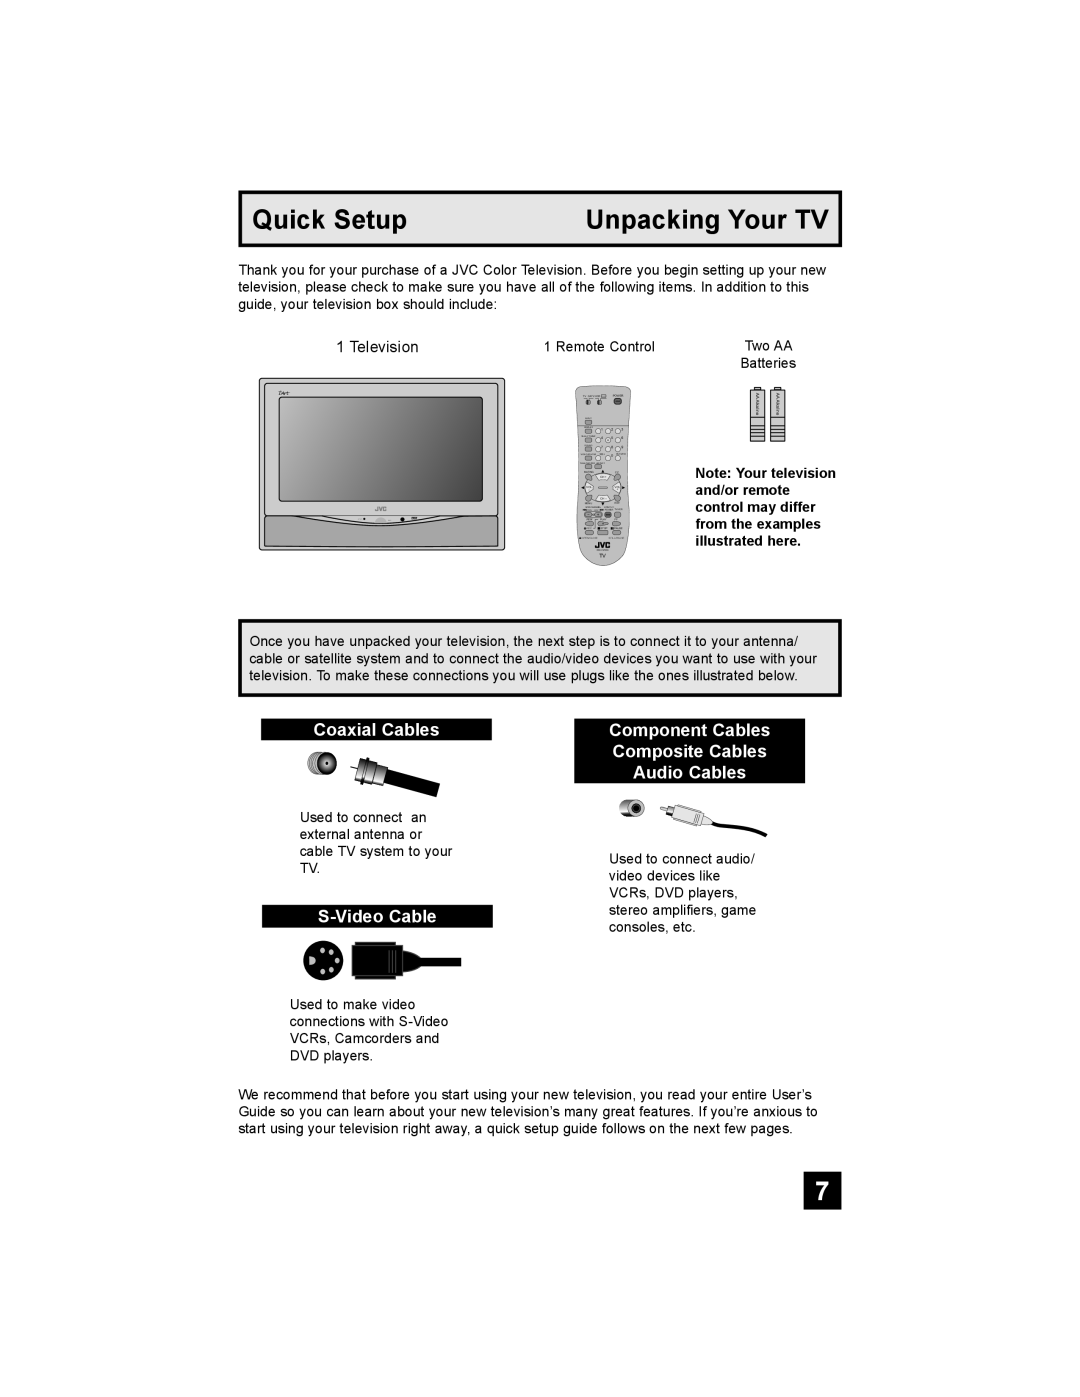 JVC AV 30W476 manual Quick Setup, Unpacking Your TV, Coaxial Cables, S-Video Cable 